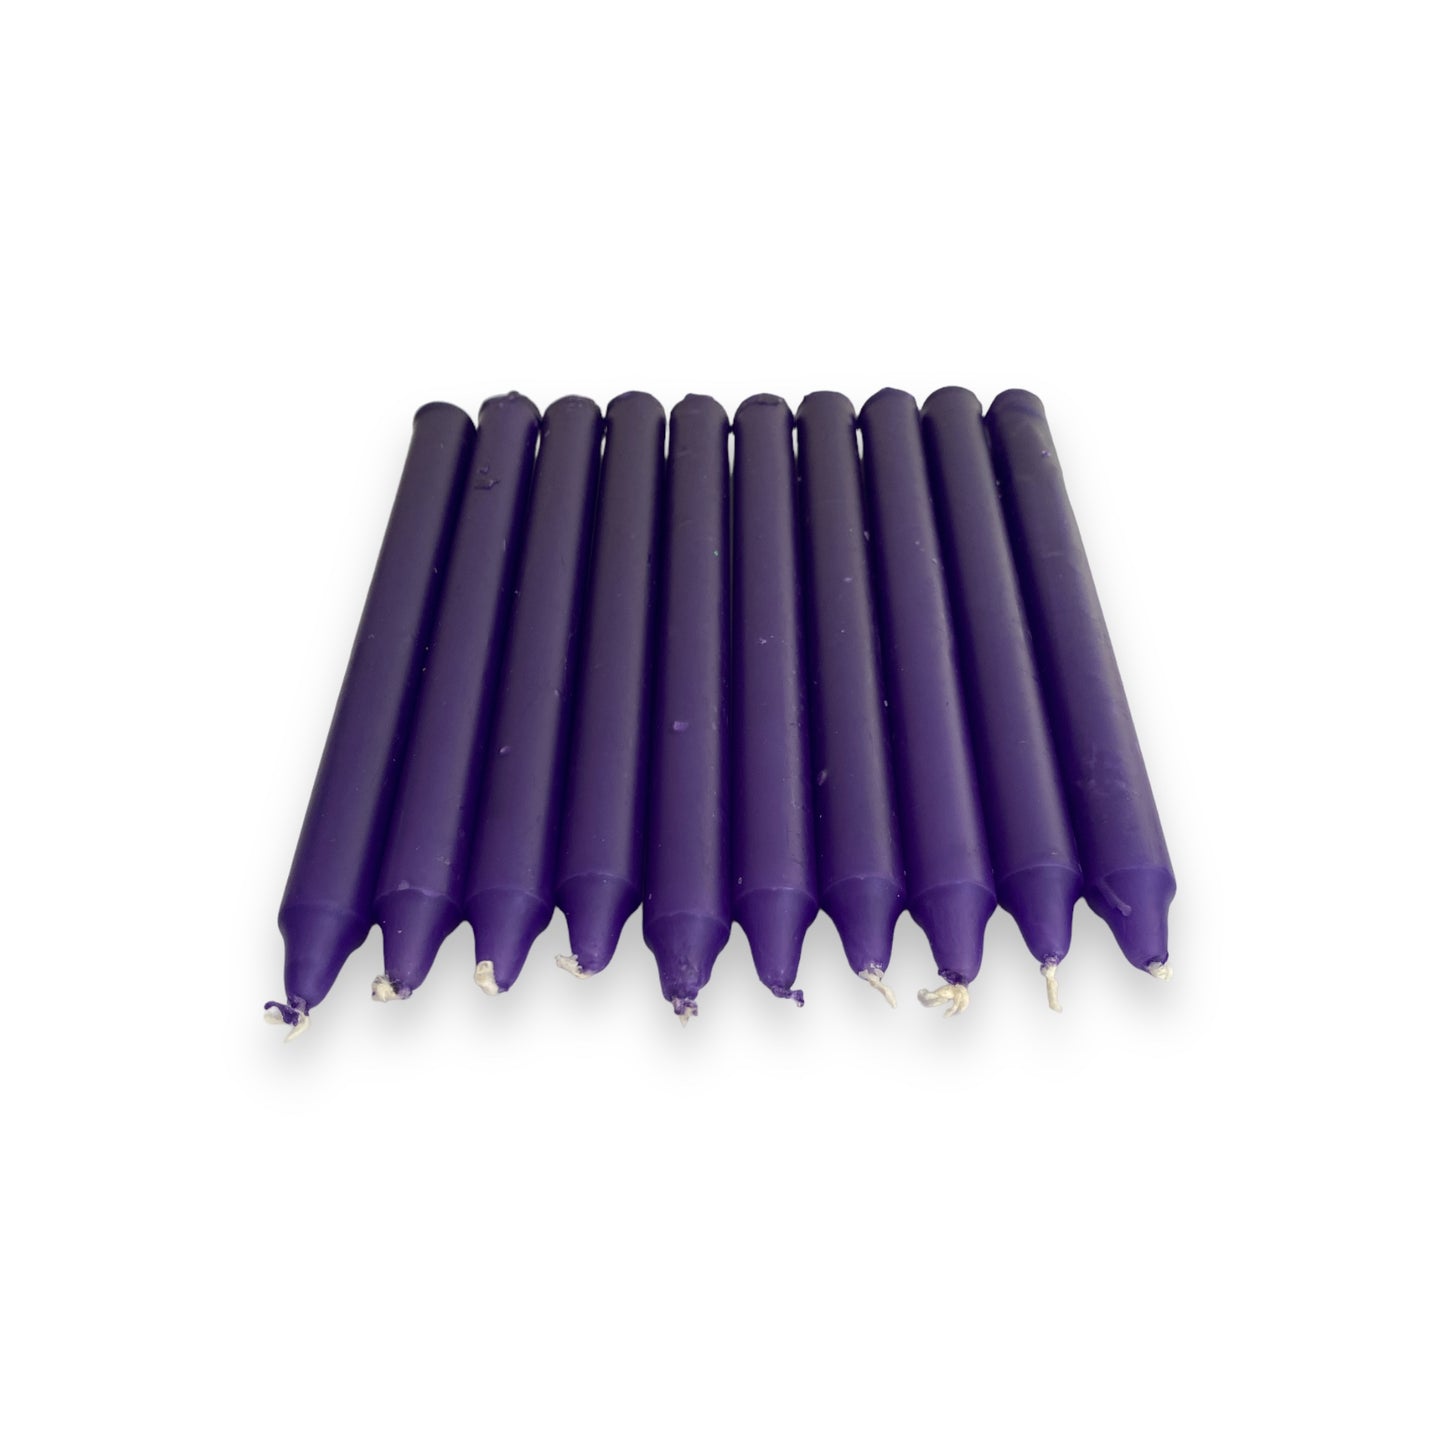 Pack of 10 Purple Candles - 17cm